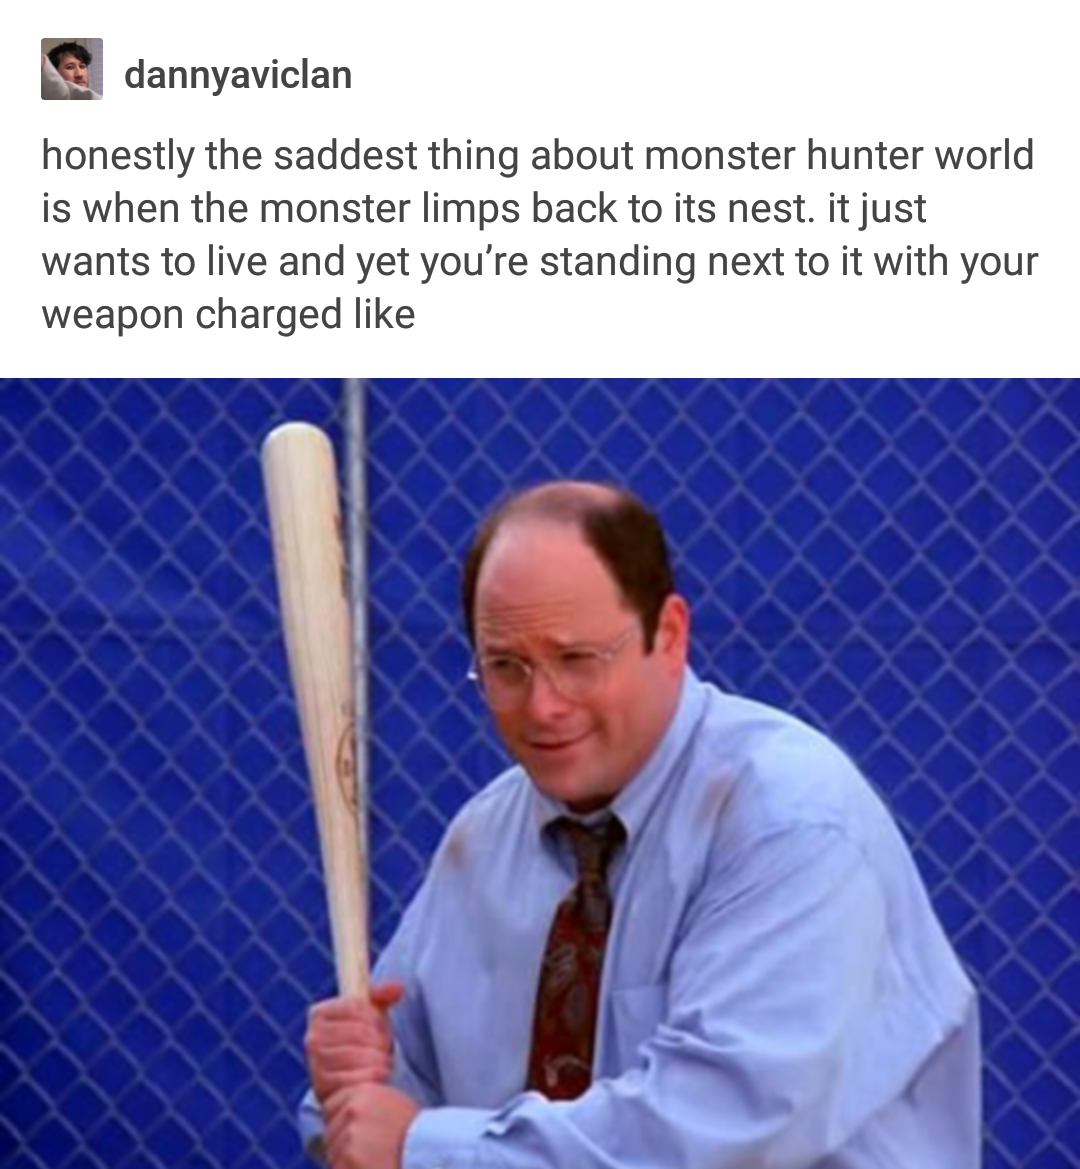 funny gaming memes - george costanza baseball - dannyaviclan honestly the saddest thing about monster hunter World is when the monster limps back to its nest. it just wants to live and yet you're standing next to it with your weapon charged